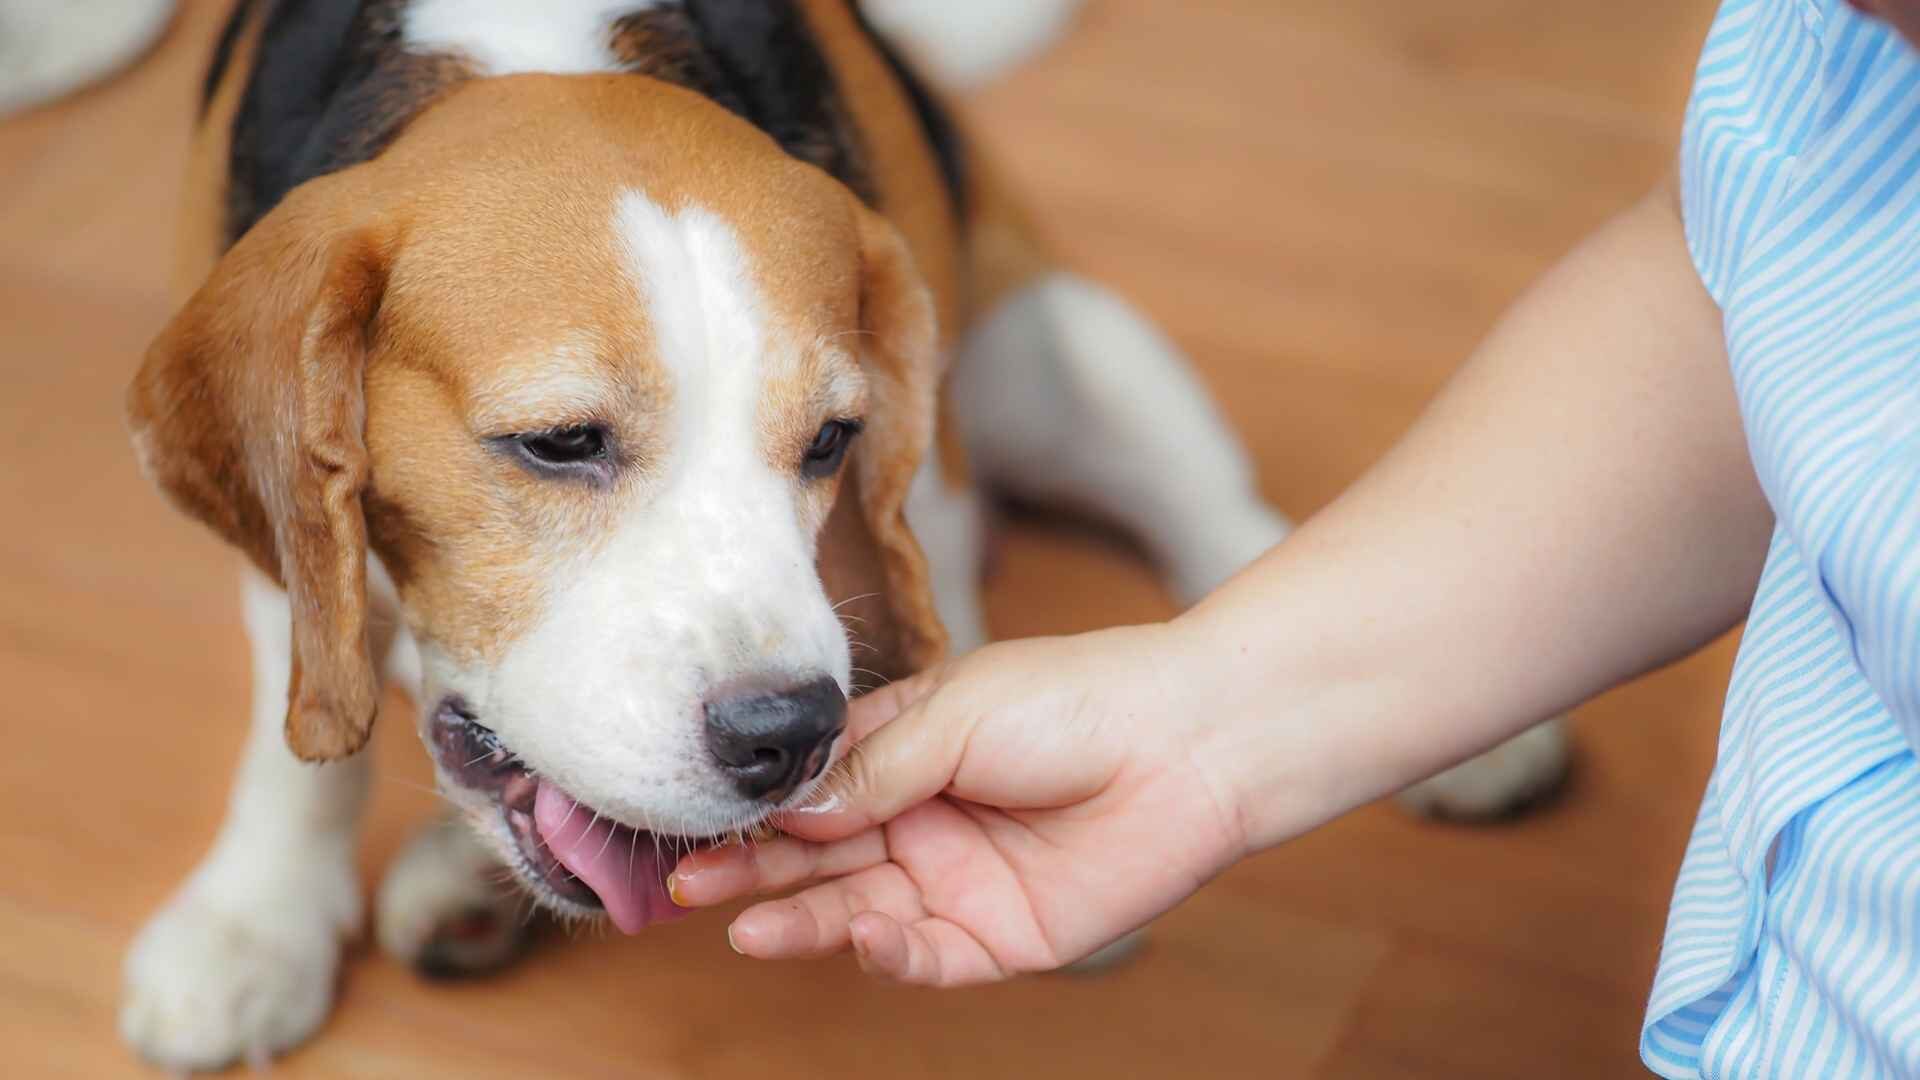 How to Feed a Dog with Diarrhea: Guide with 6 Homemade Foods